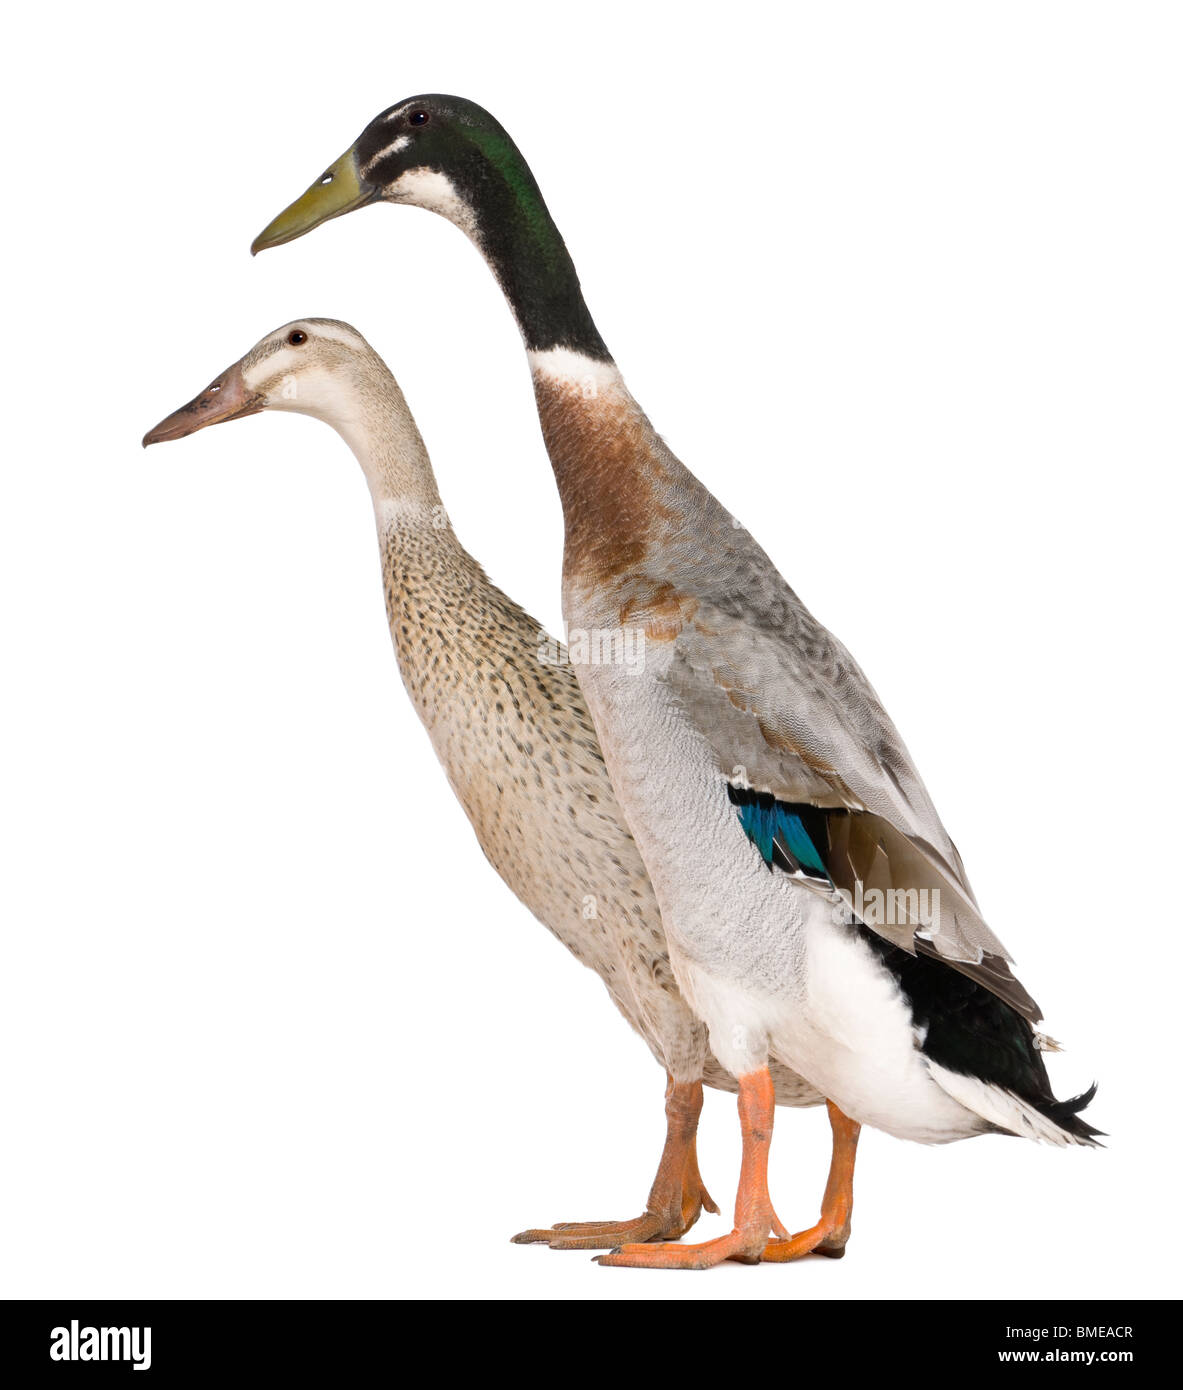 Male and female Indian Runner Ducks, 3 years old, standing in front of white background Stock Photo